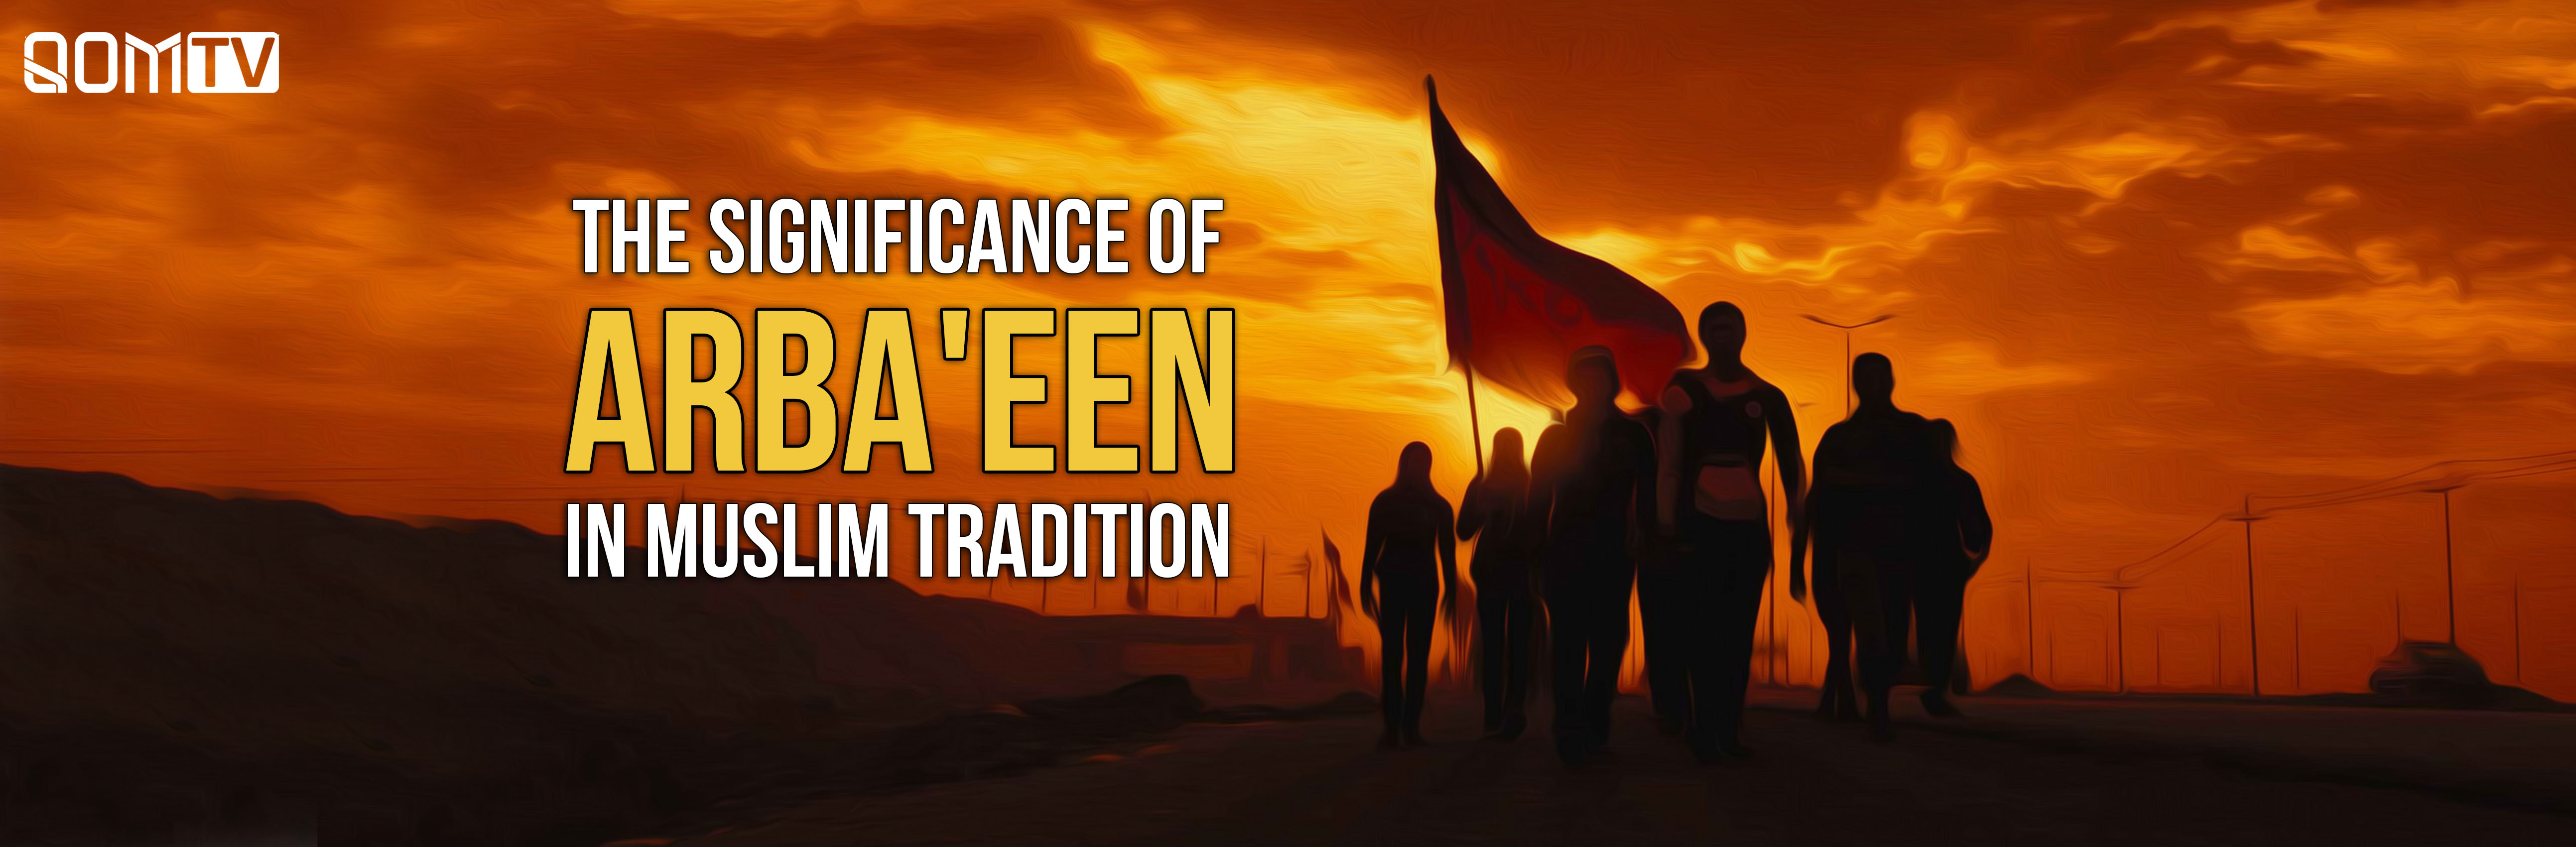 The Significance of Arba'een in Muslim tradition -